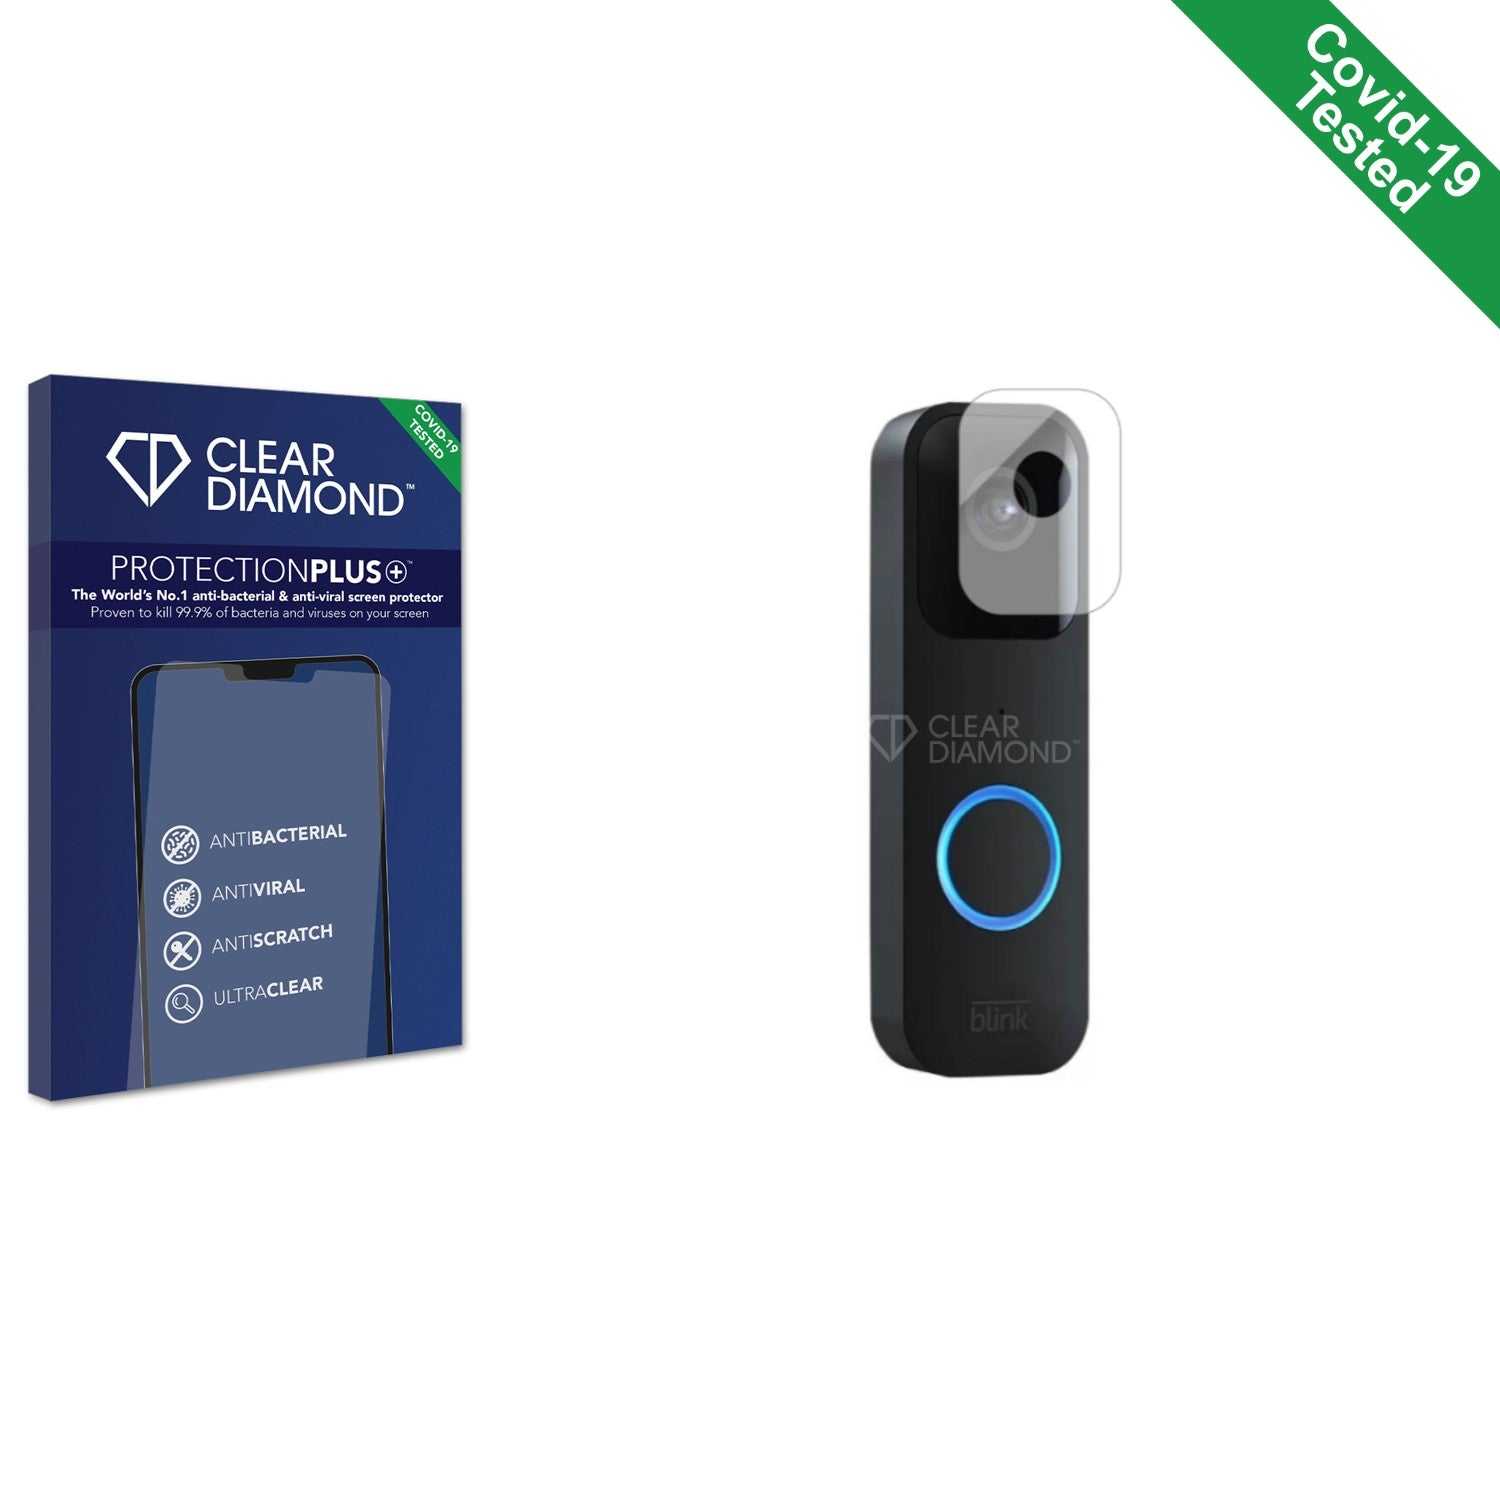 ScreenShield, Clear Diamond Anti-viral Screen Protector for Blink Video Doorbell